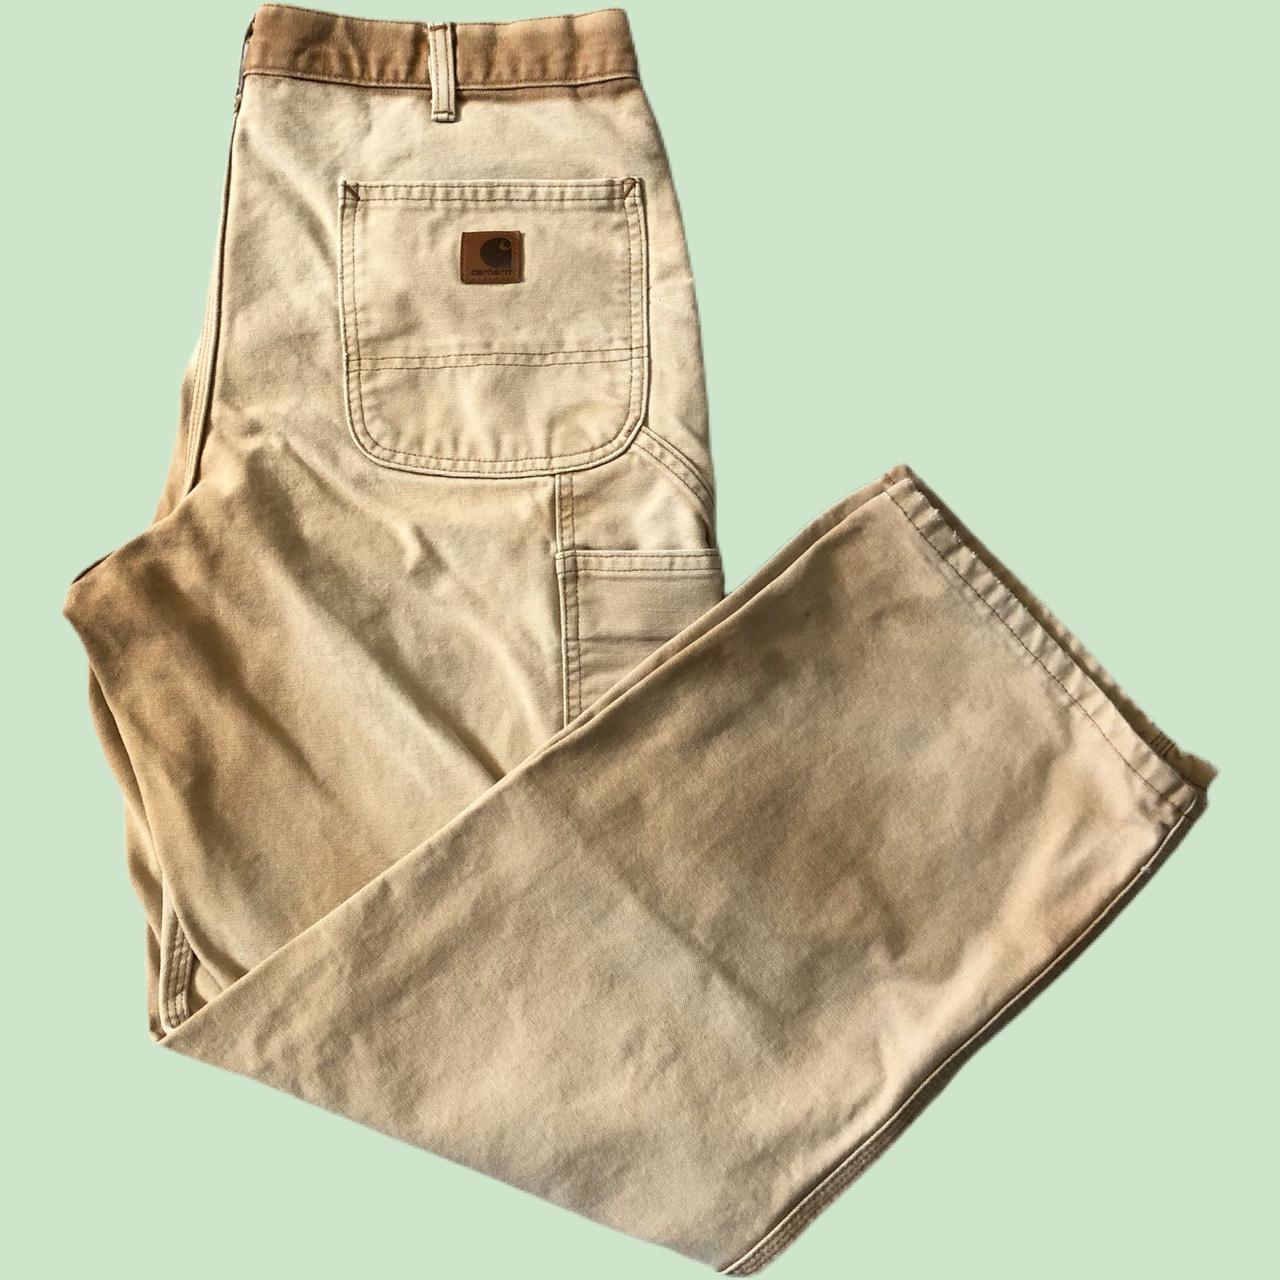 Product Image 1 - faded tan / beige carhartt